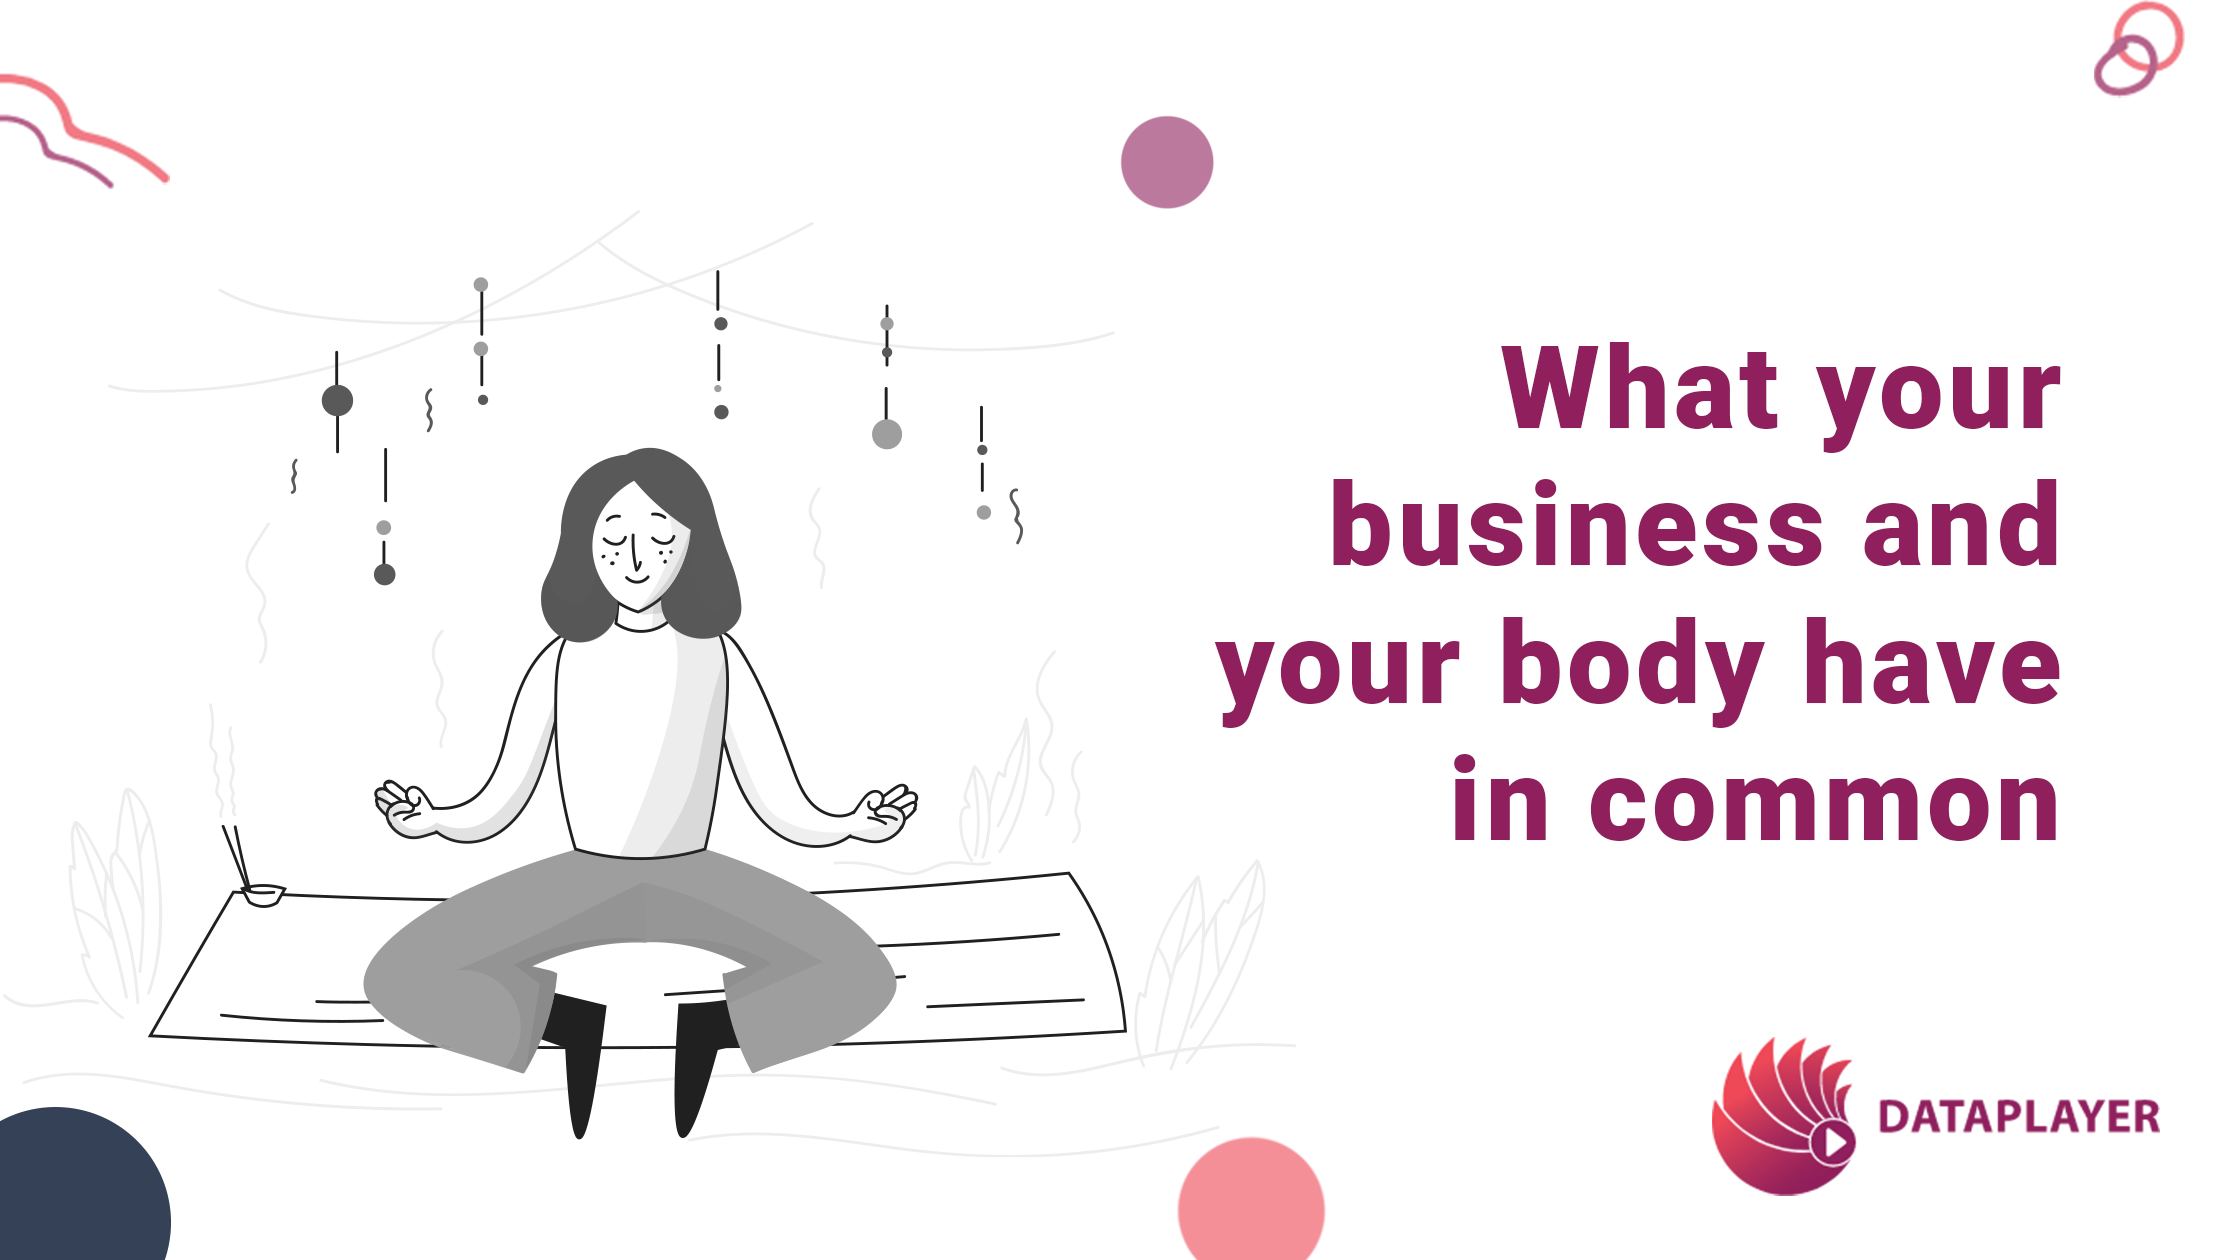 What your business and your body have in common